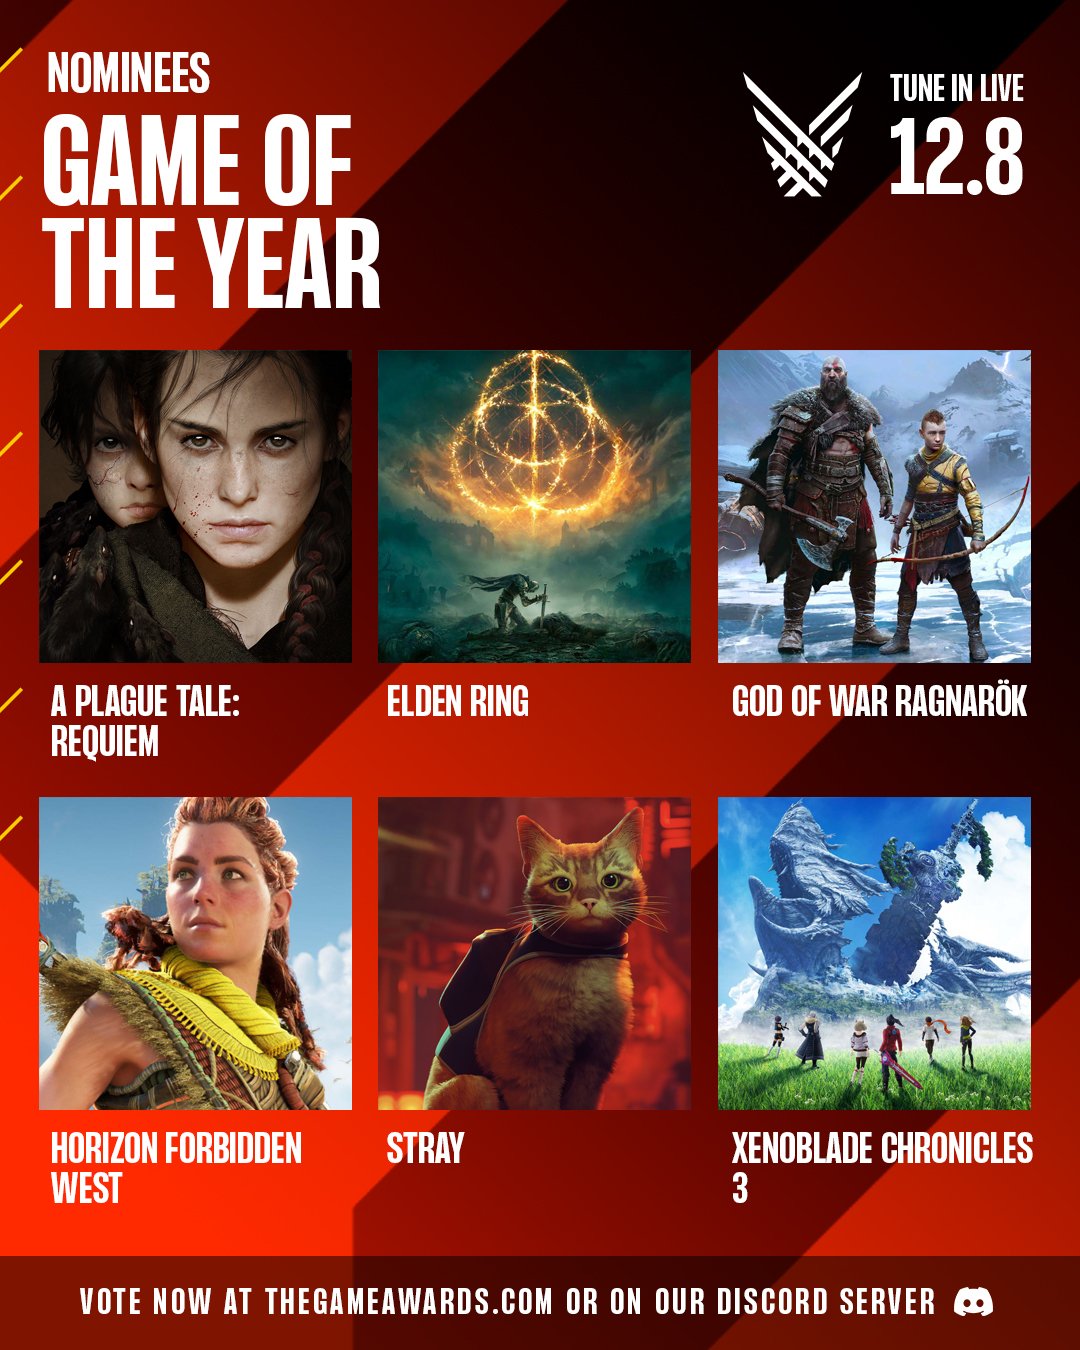 The Game Awards 2022 - All Winners 